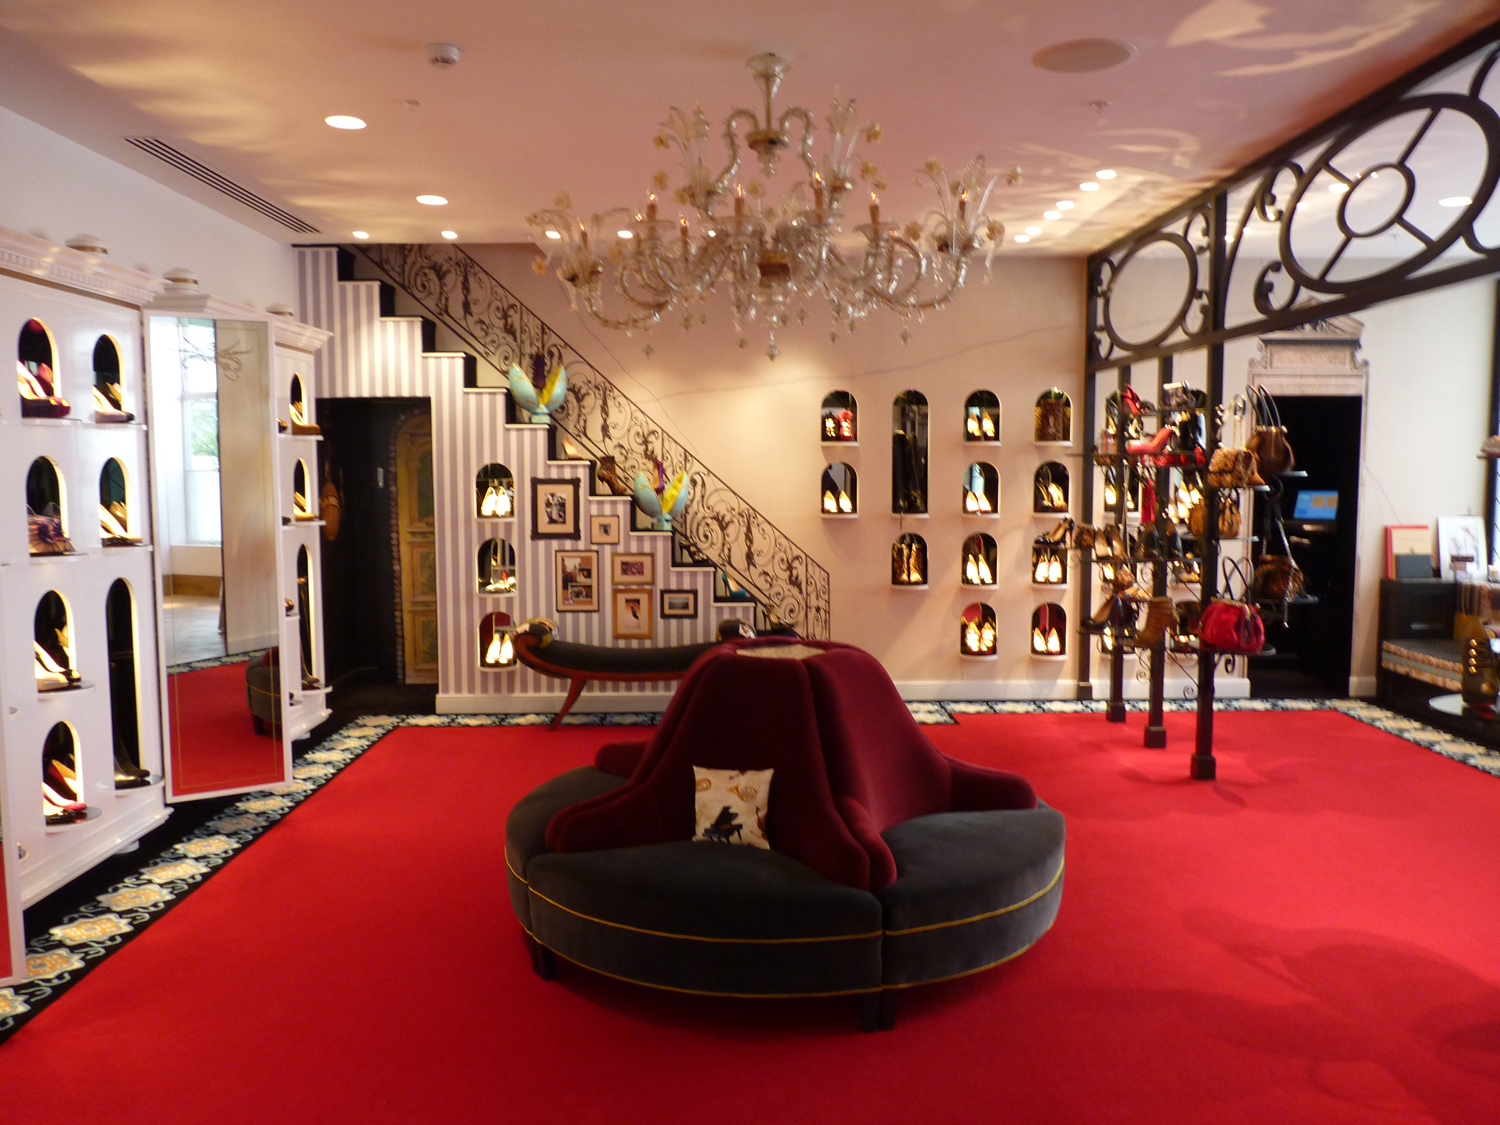 Christian Louboutin to Open 1st Freestanding Canadian Store